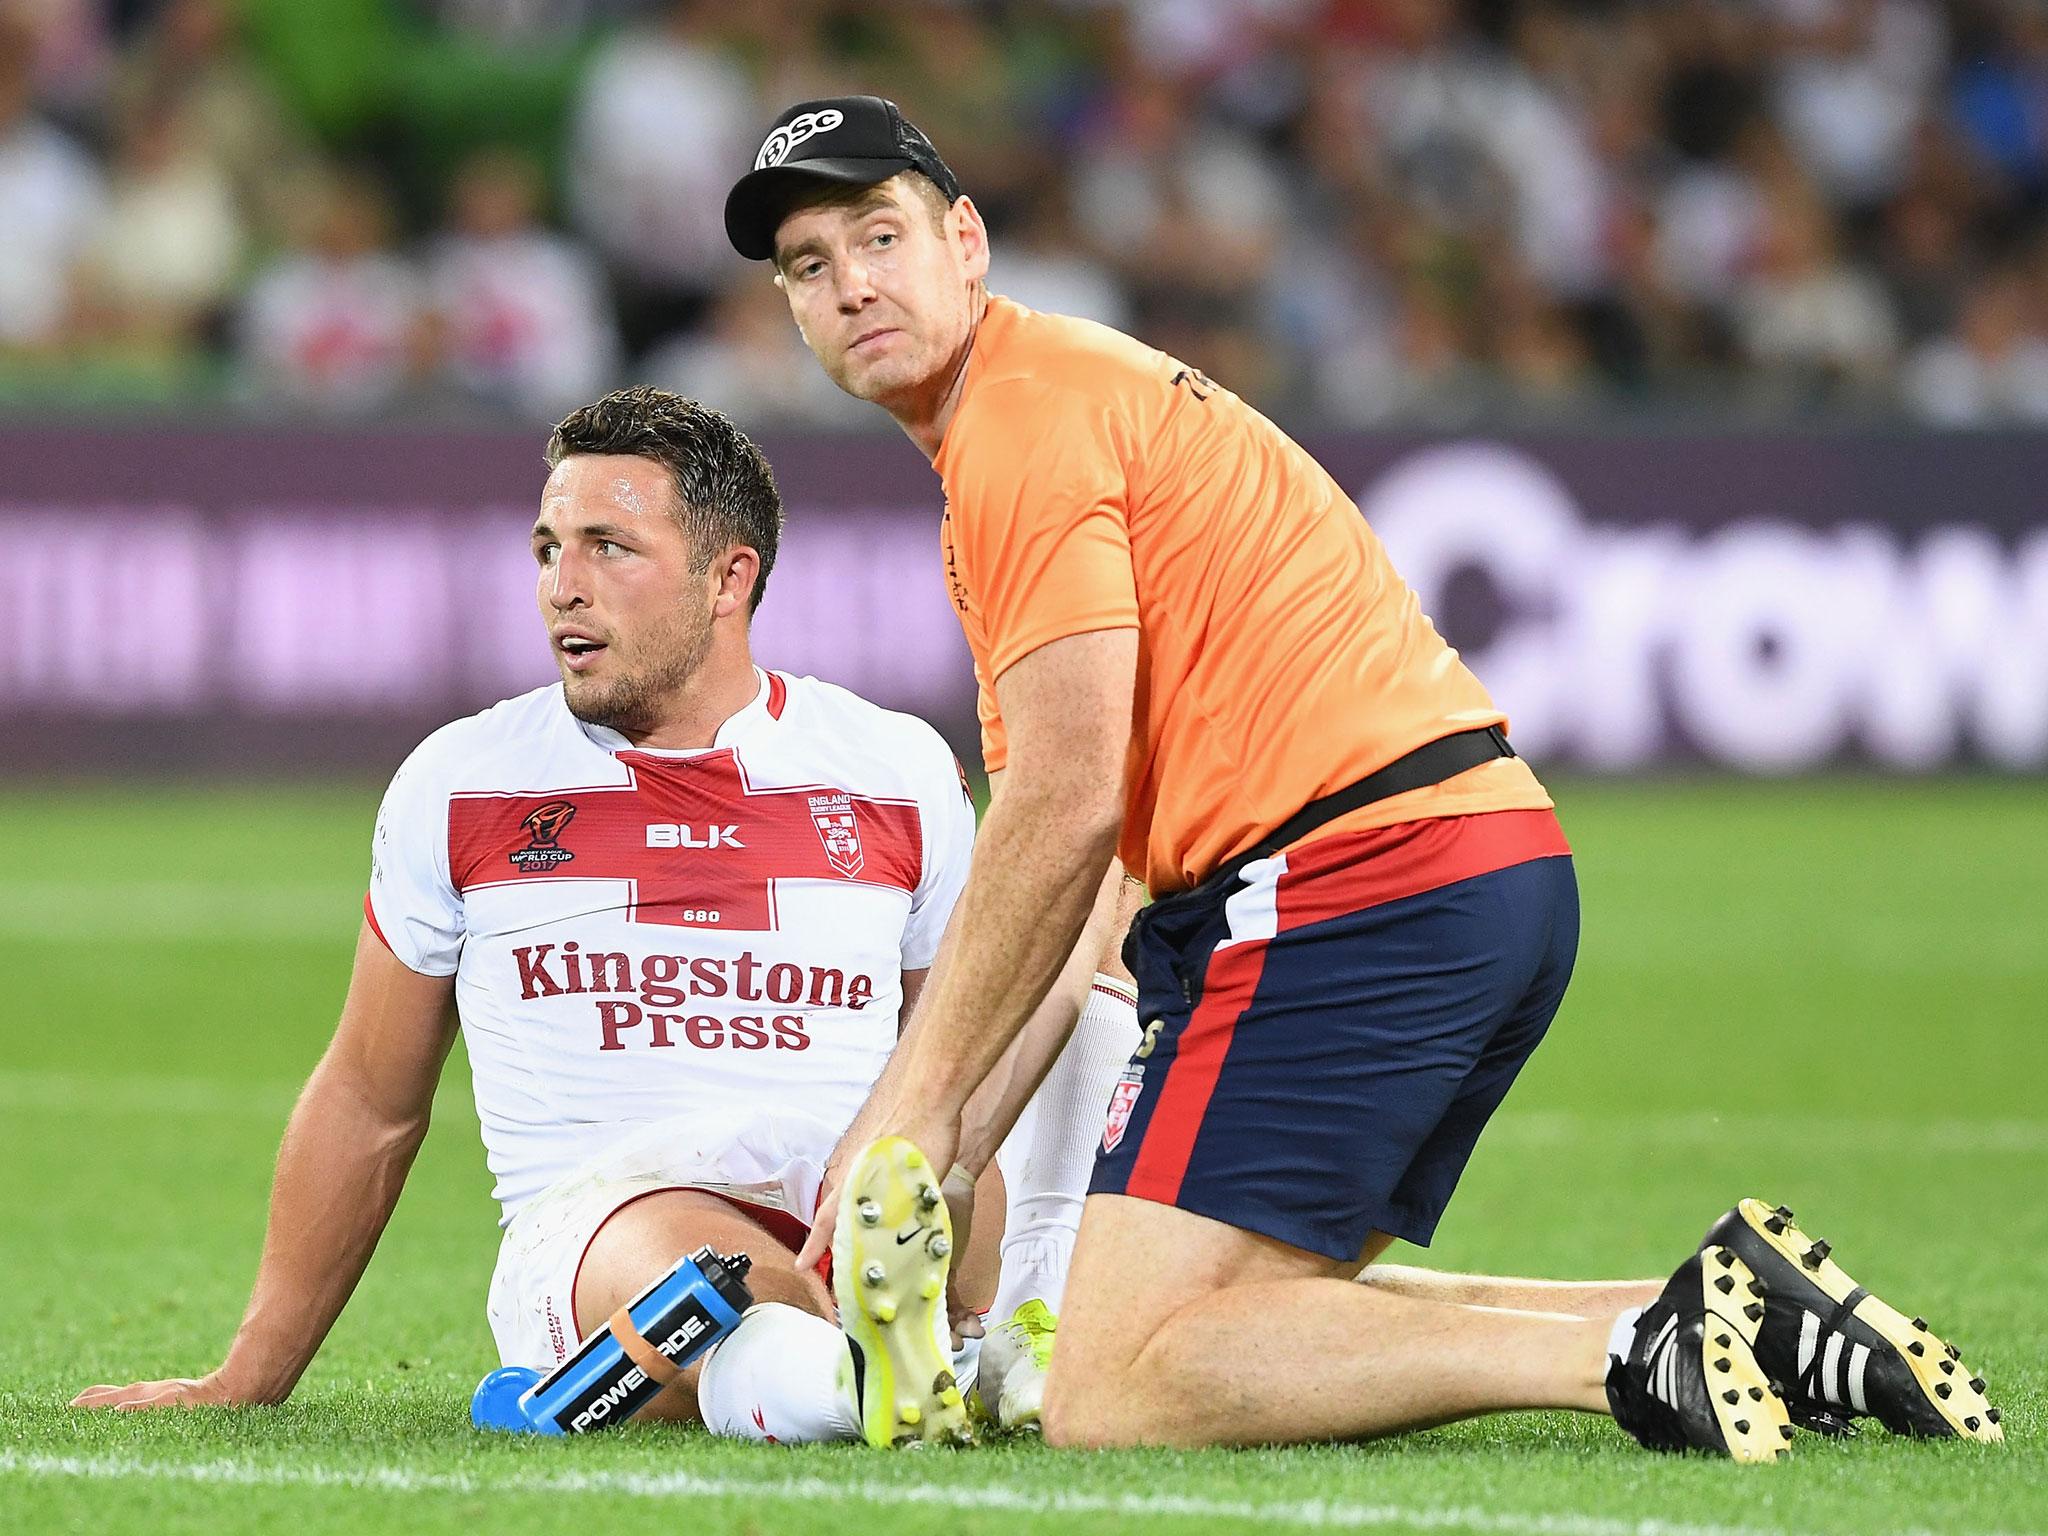 Burgess was forced off and could miss the remainder of the tournament